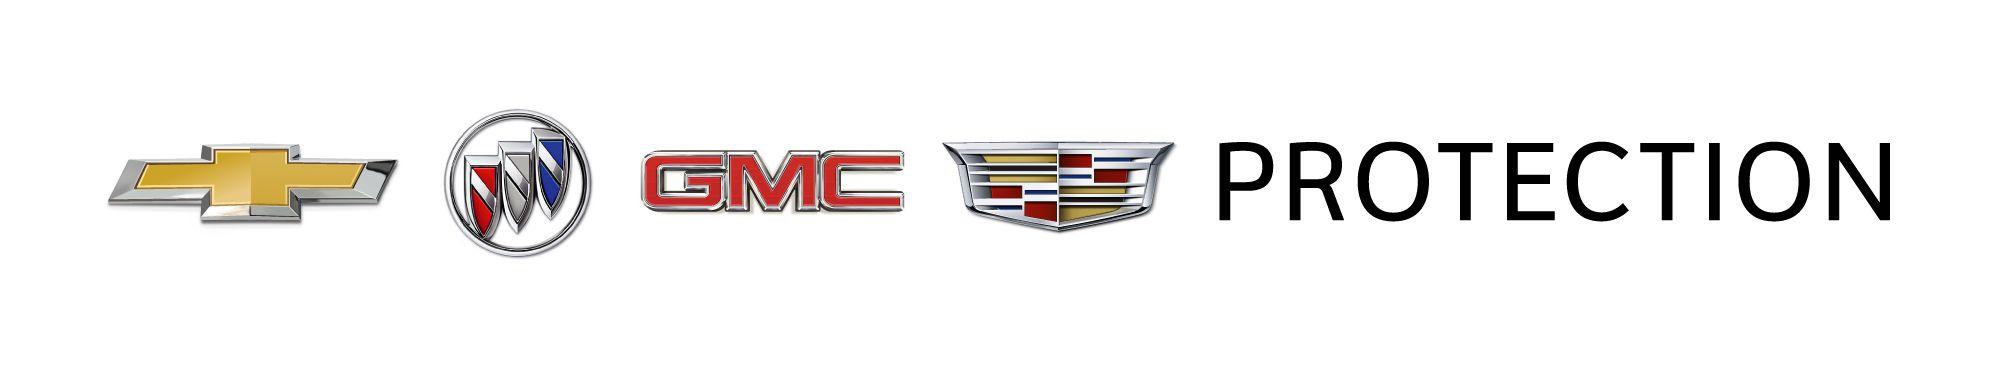 Chevy Buick Logo - Chevrolet, Buick, GMC and Cadillac Protection | GM Financial